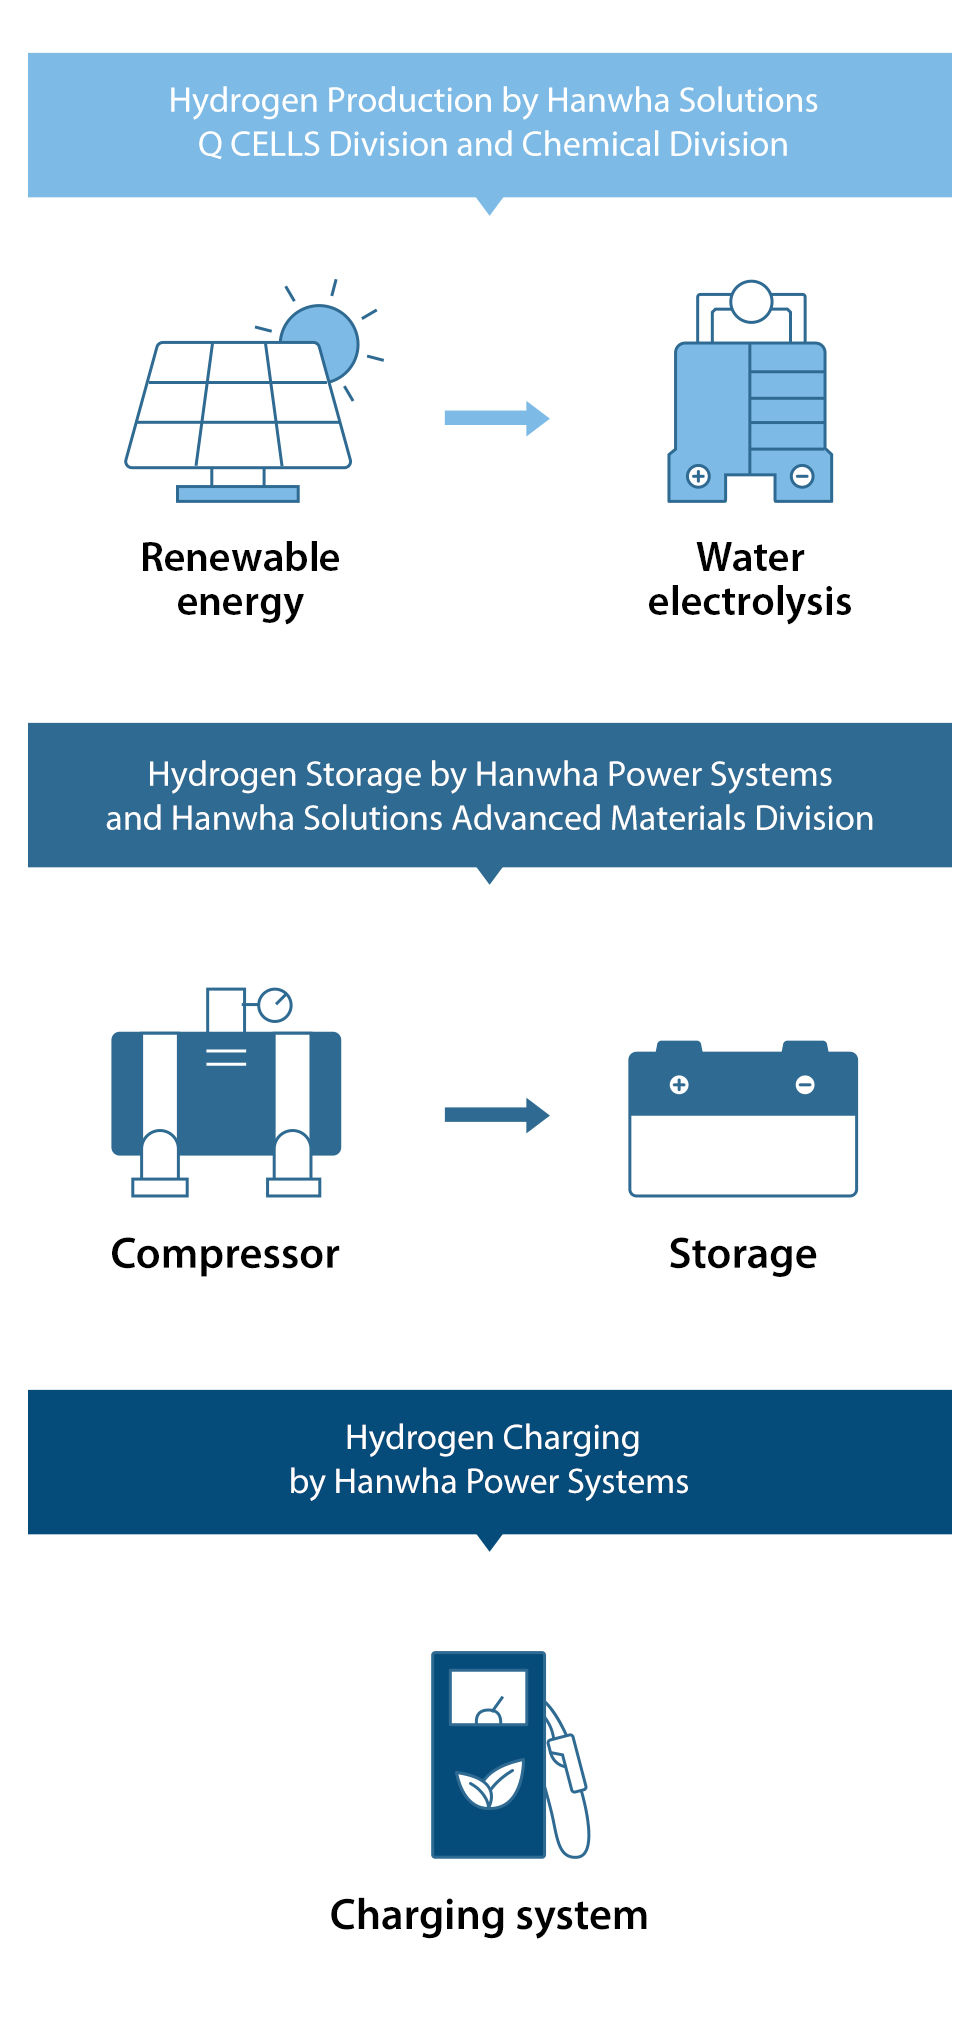 Hanwha Solutions's infrastructure ensures that energy value chains deliver renewable energy and reduce their carbon footprint